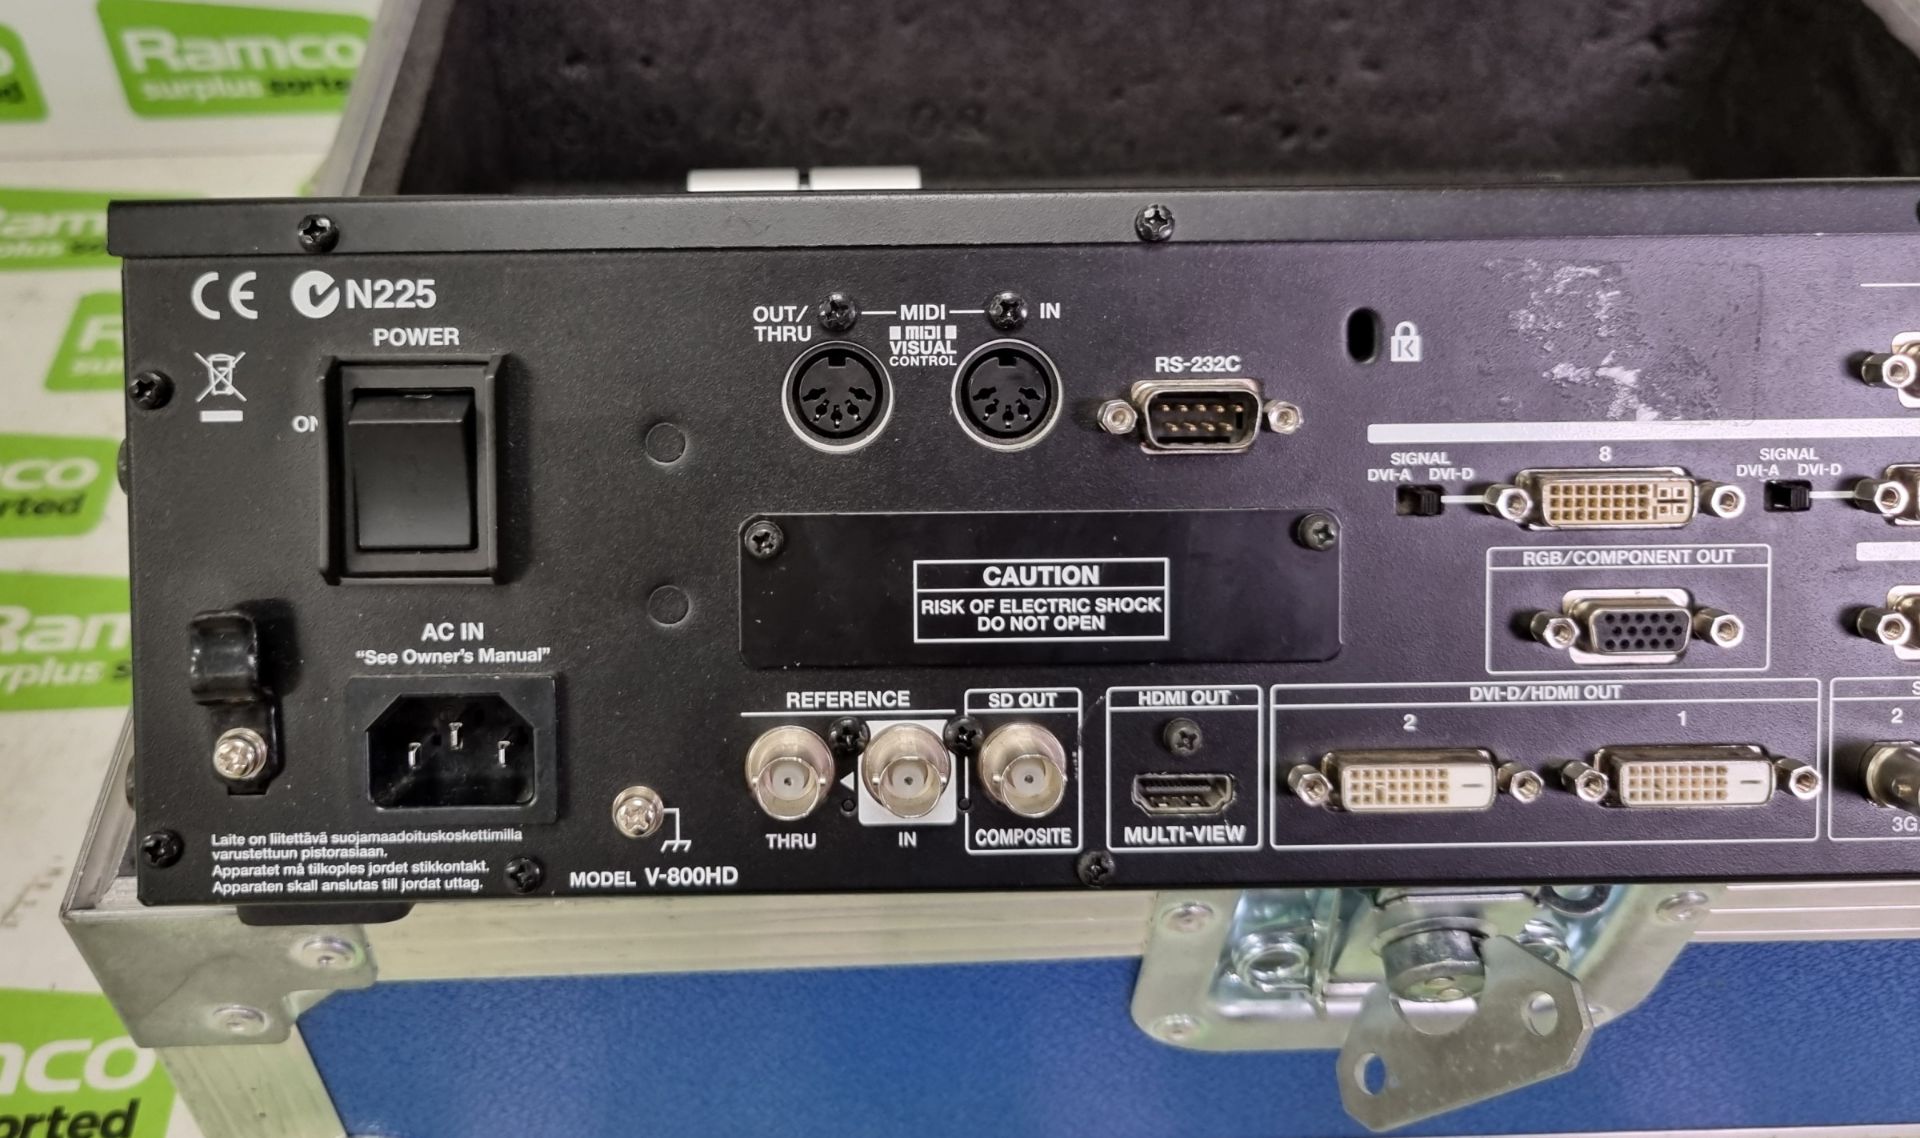 Roland V-800HD multi-format video switcher with flight case - FAULTY (OUTPUT 3/4 FREEZING) - Image 7 of 9